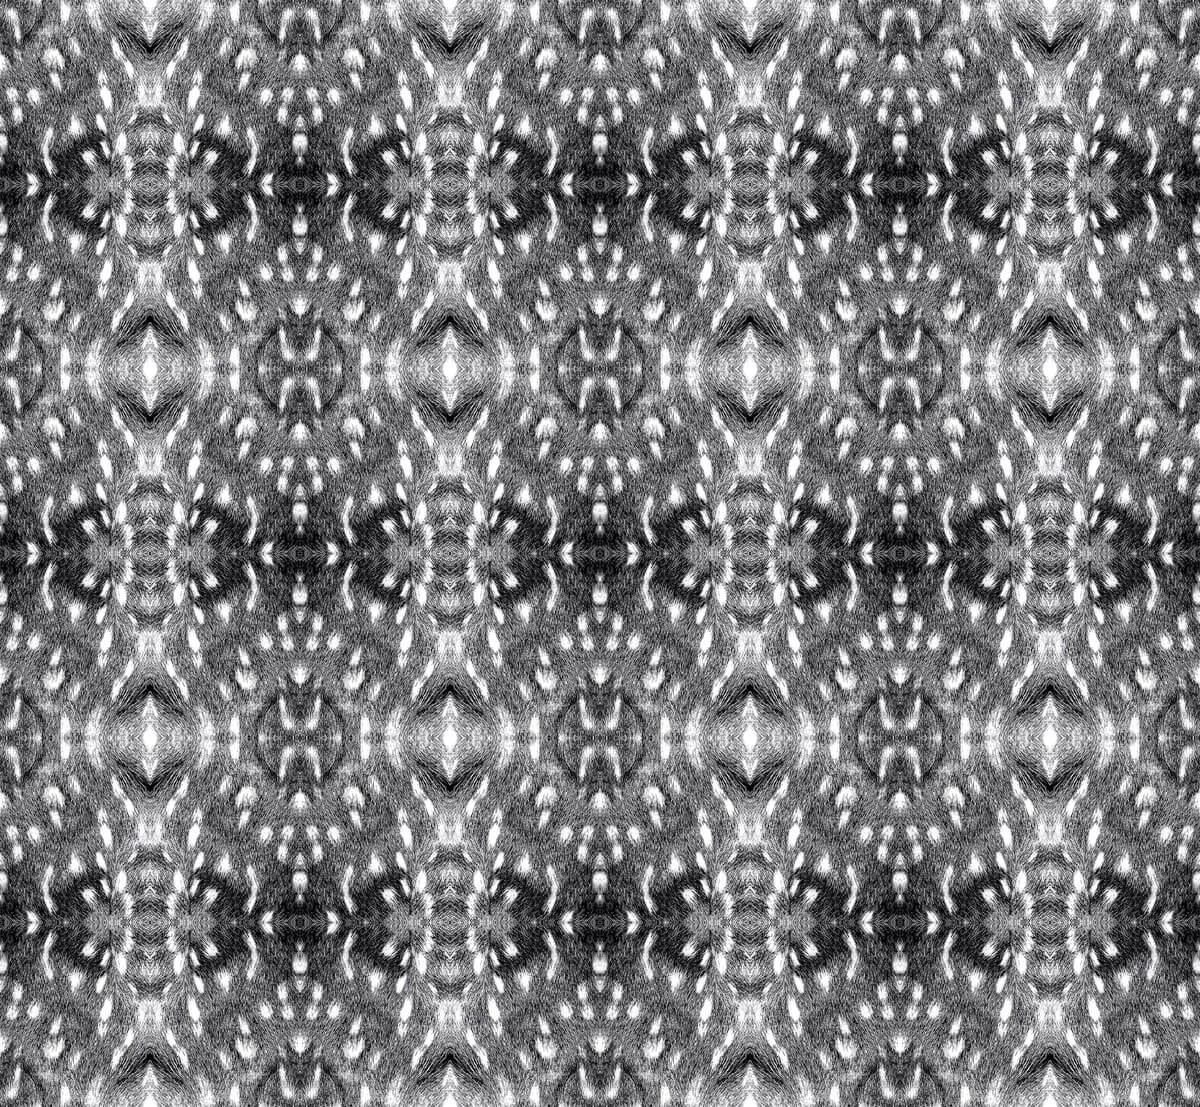 Fawn pattern in black and white